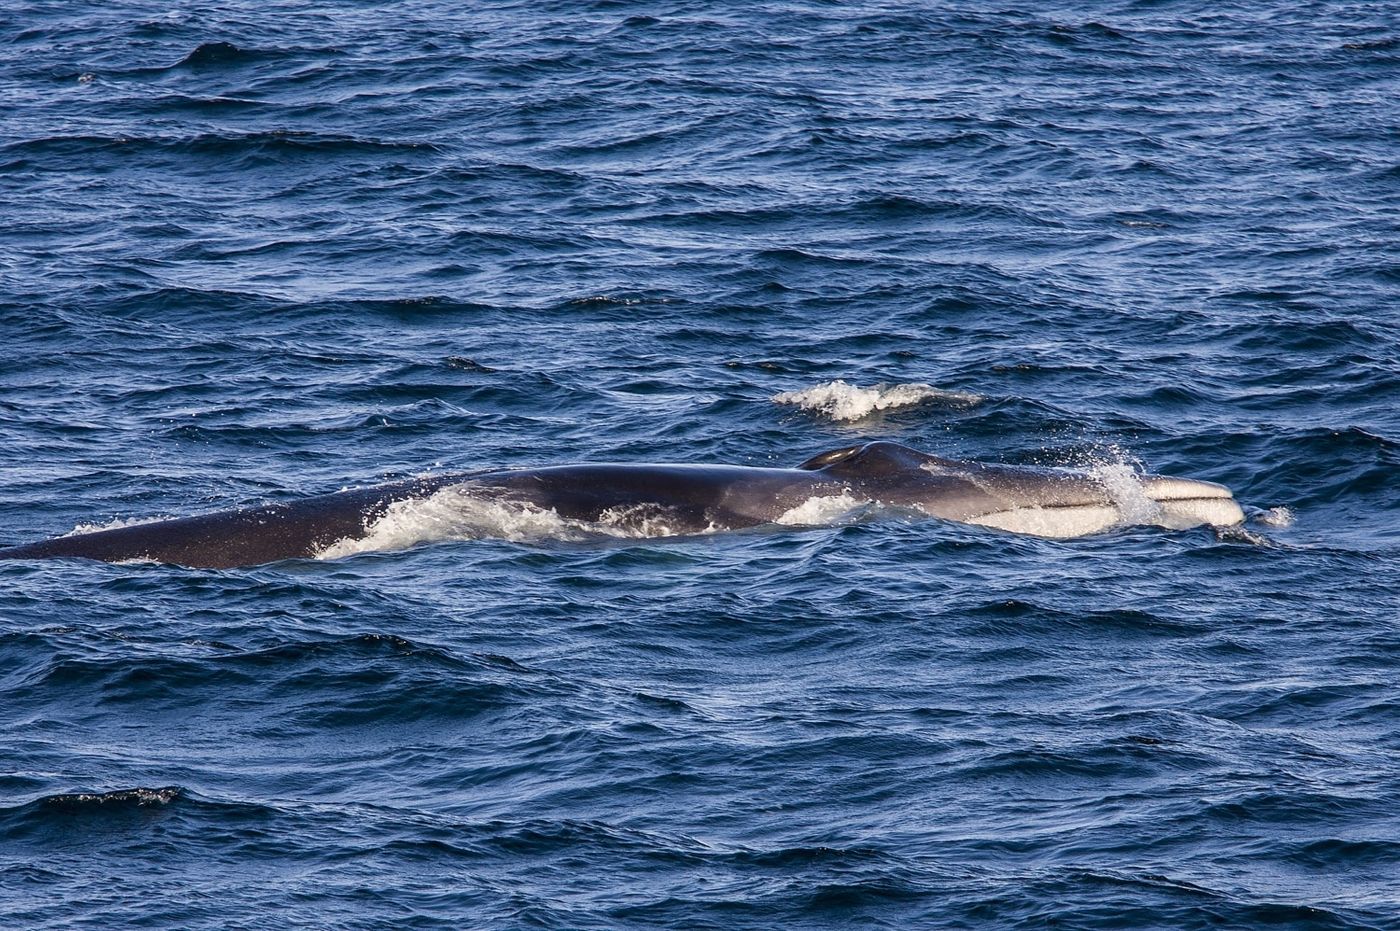 A fin whale breaching the surface.